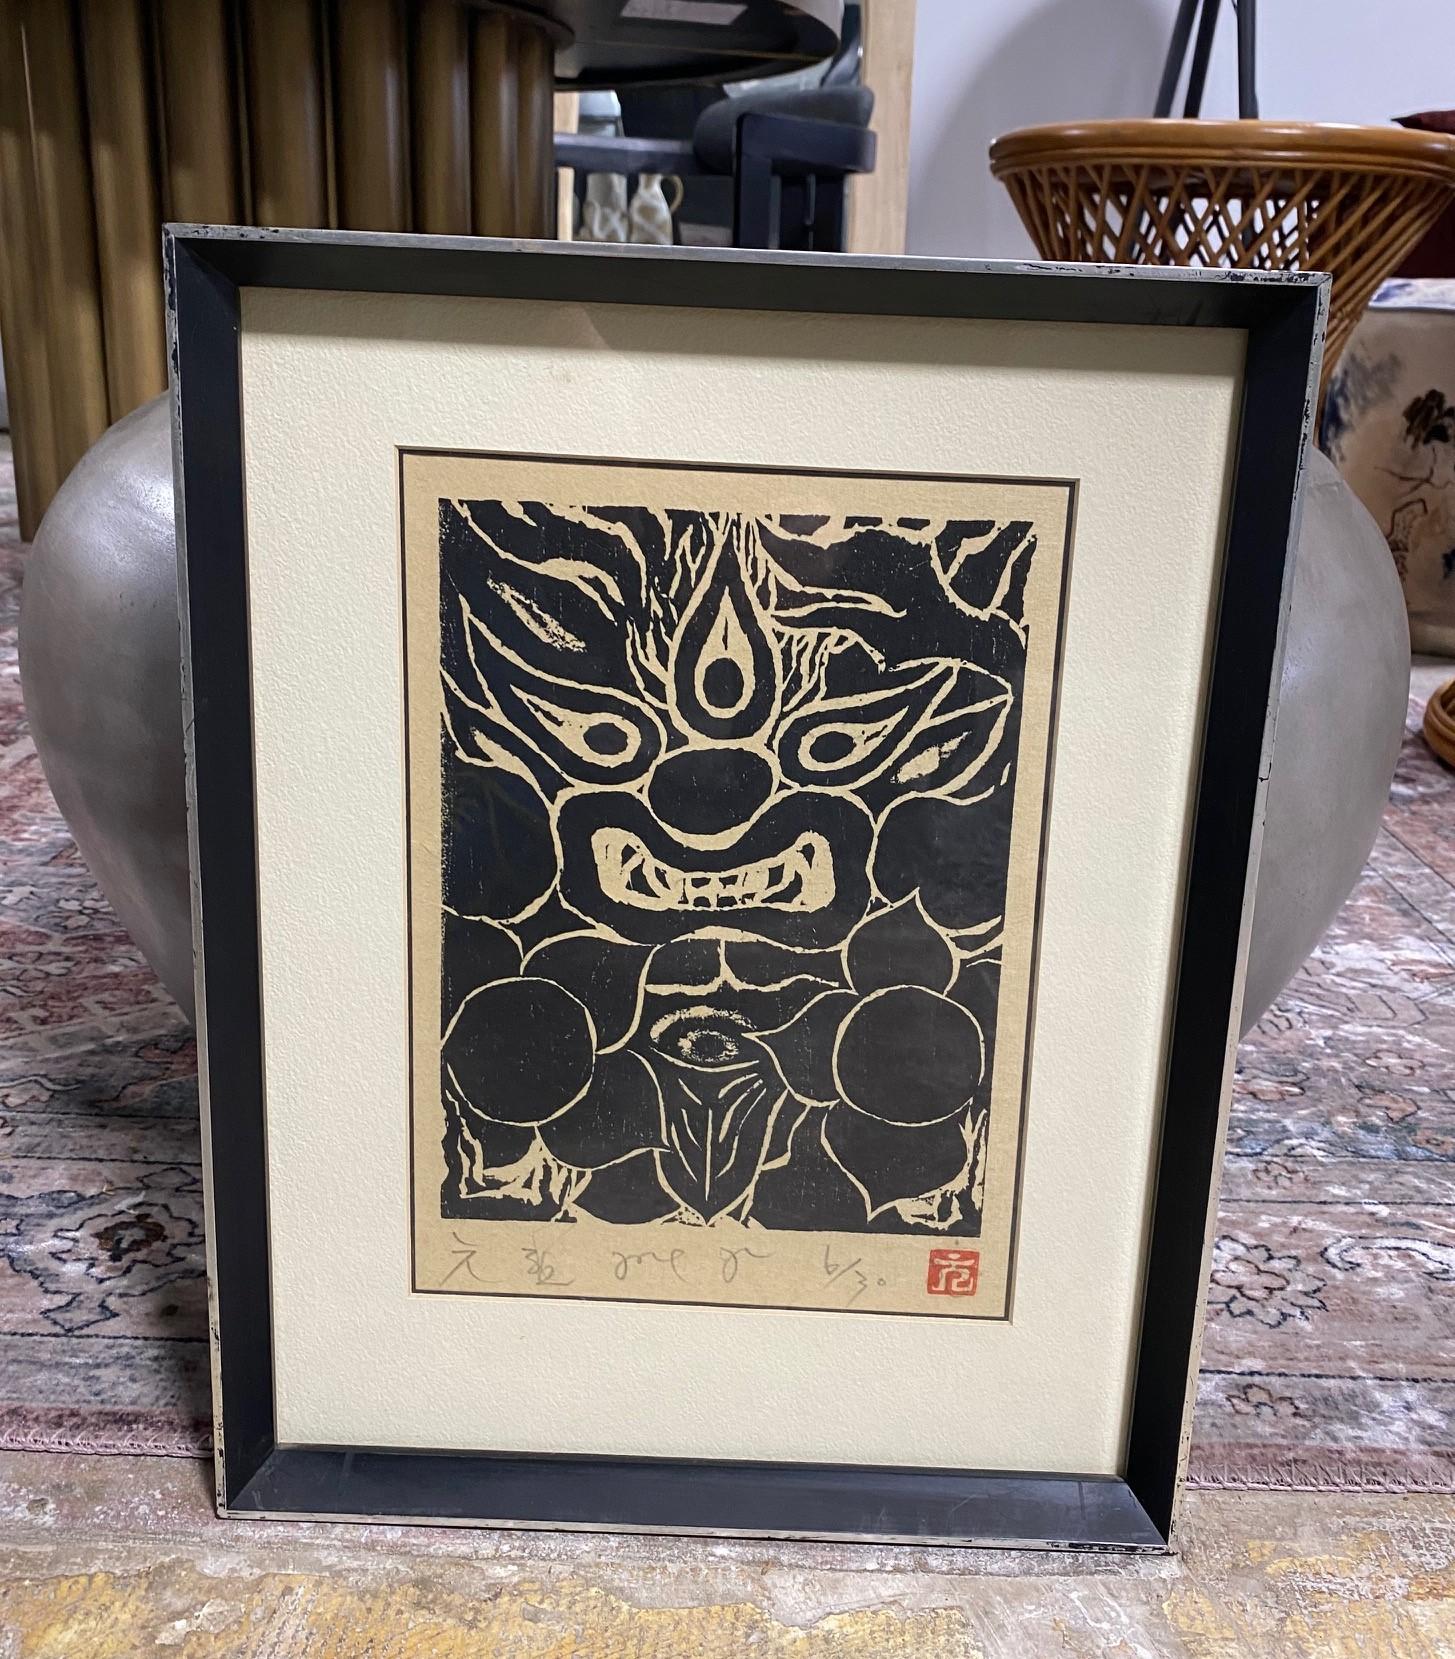 A wonderful and quite unusual limited edition black & white Japanese woodblock print of a mystical / mythological demon or creature - quite reminiscent of the work of Iwao Akiyama and master printmaker Shiko Munakata. 

The print is hand-signed in